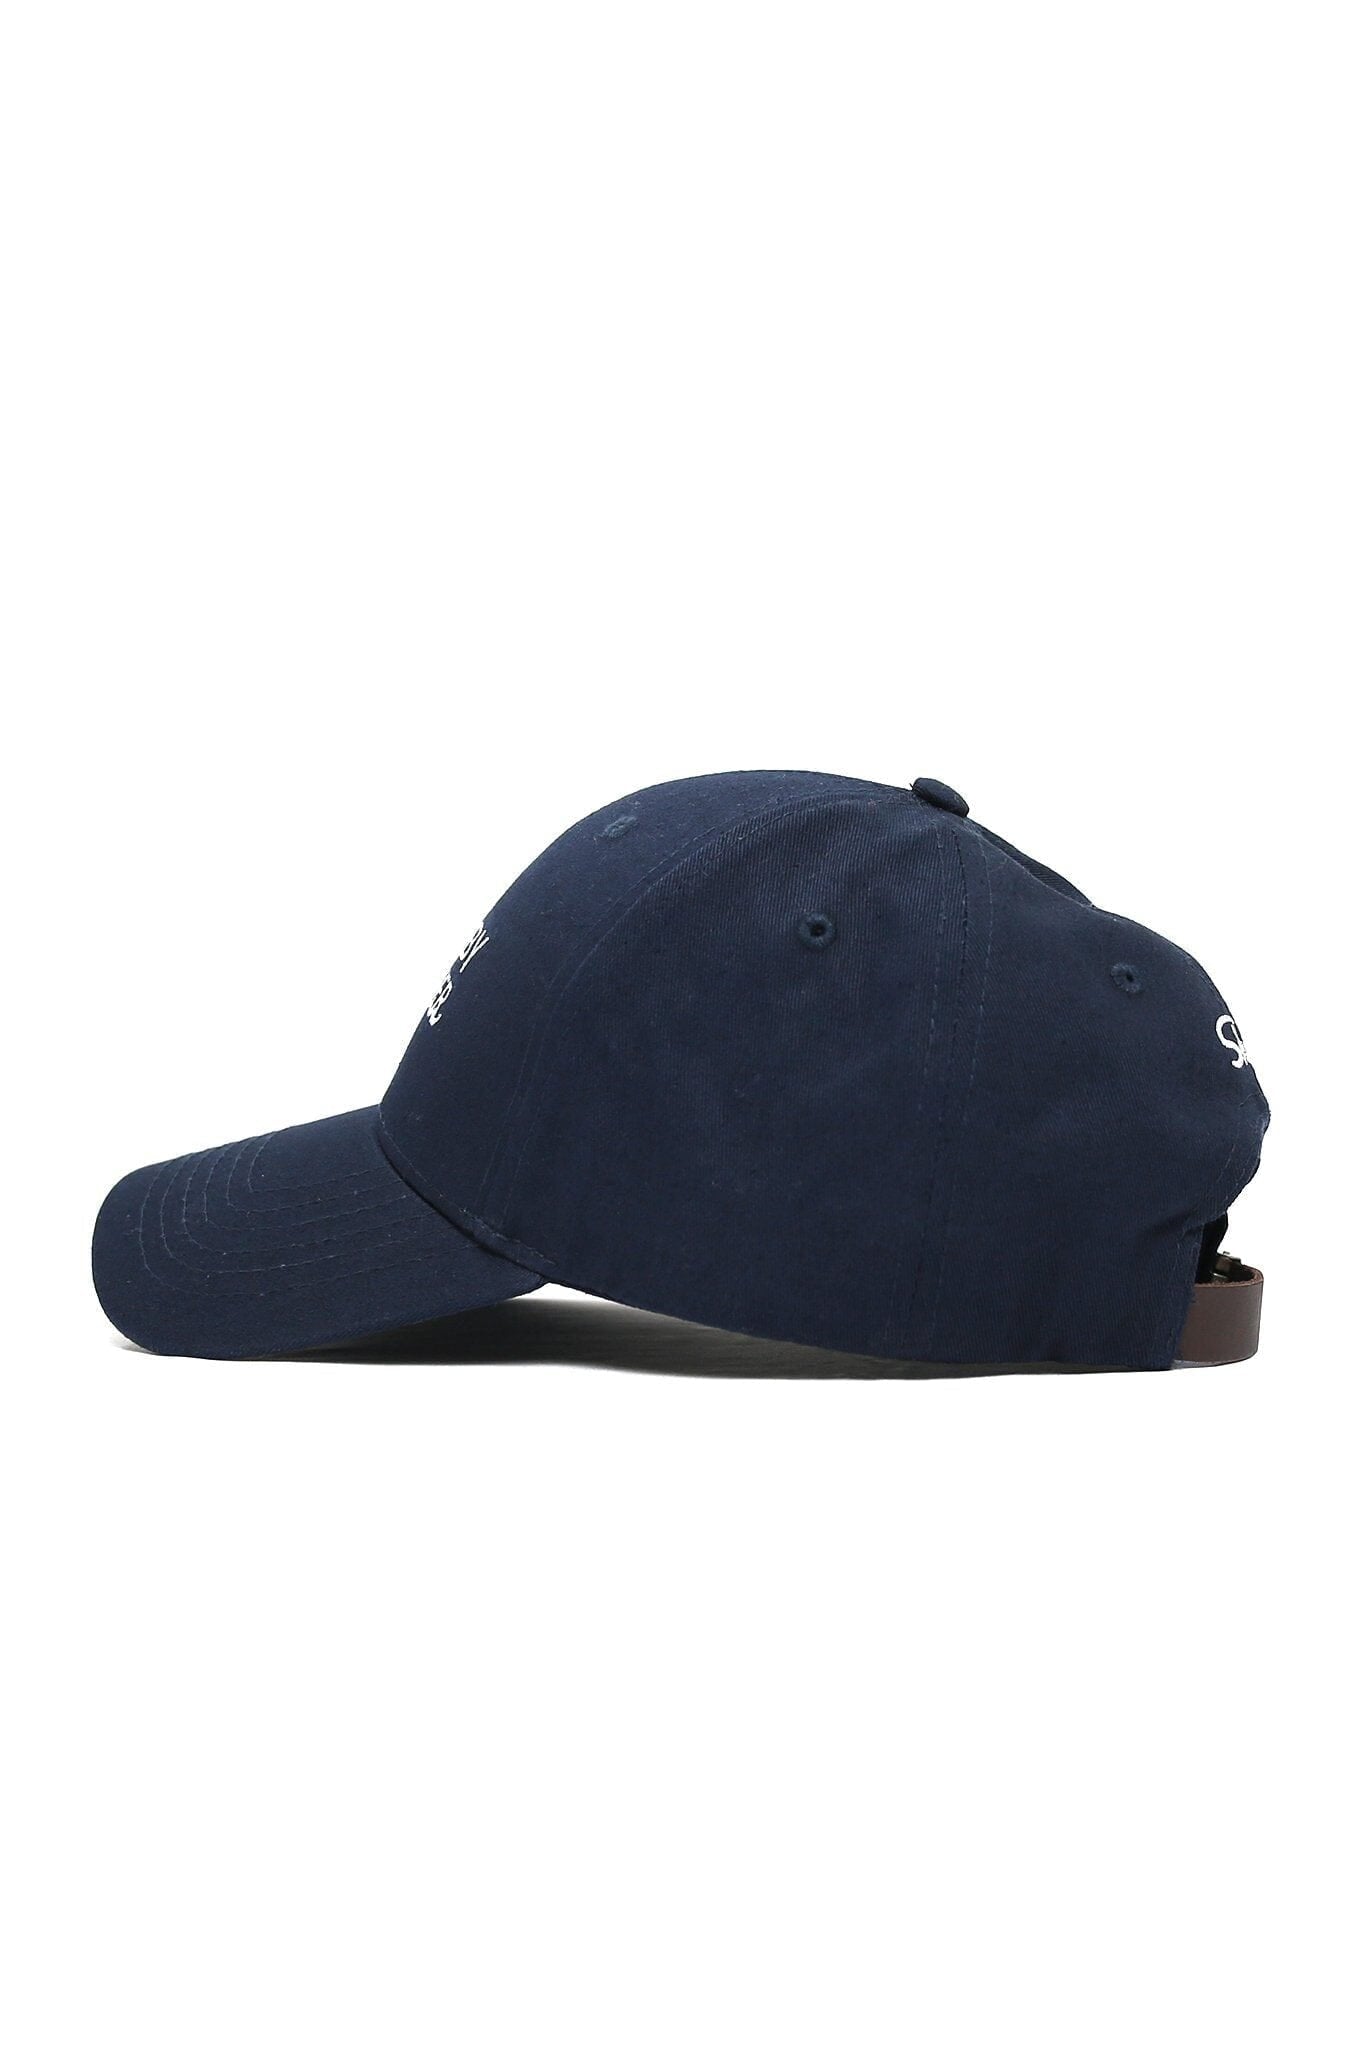 BORN BY WATER WAVES CAP - BL-NAVY - OS